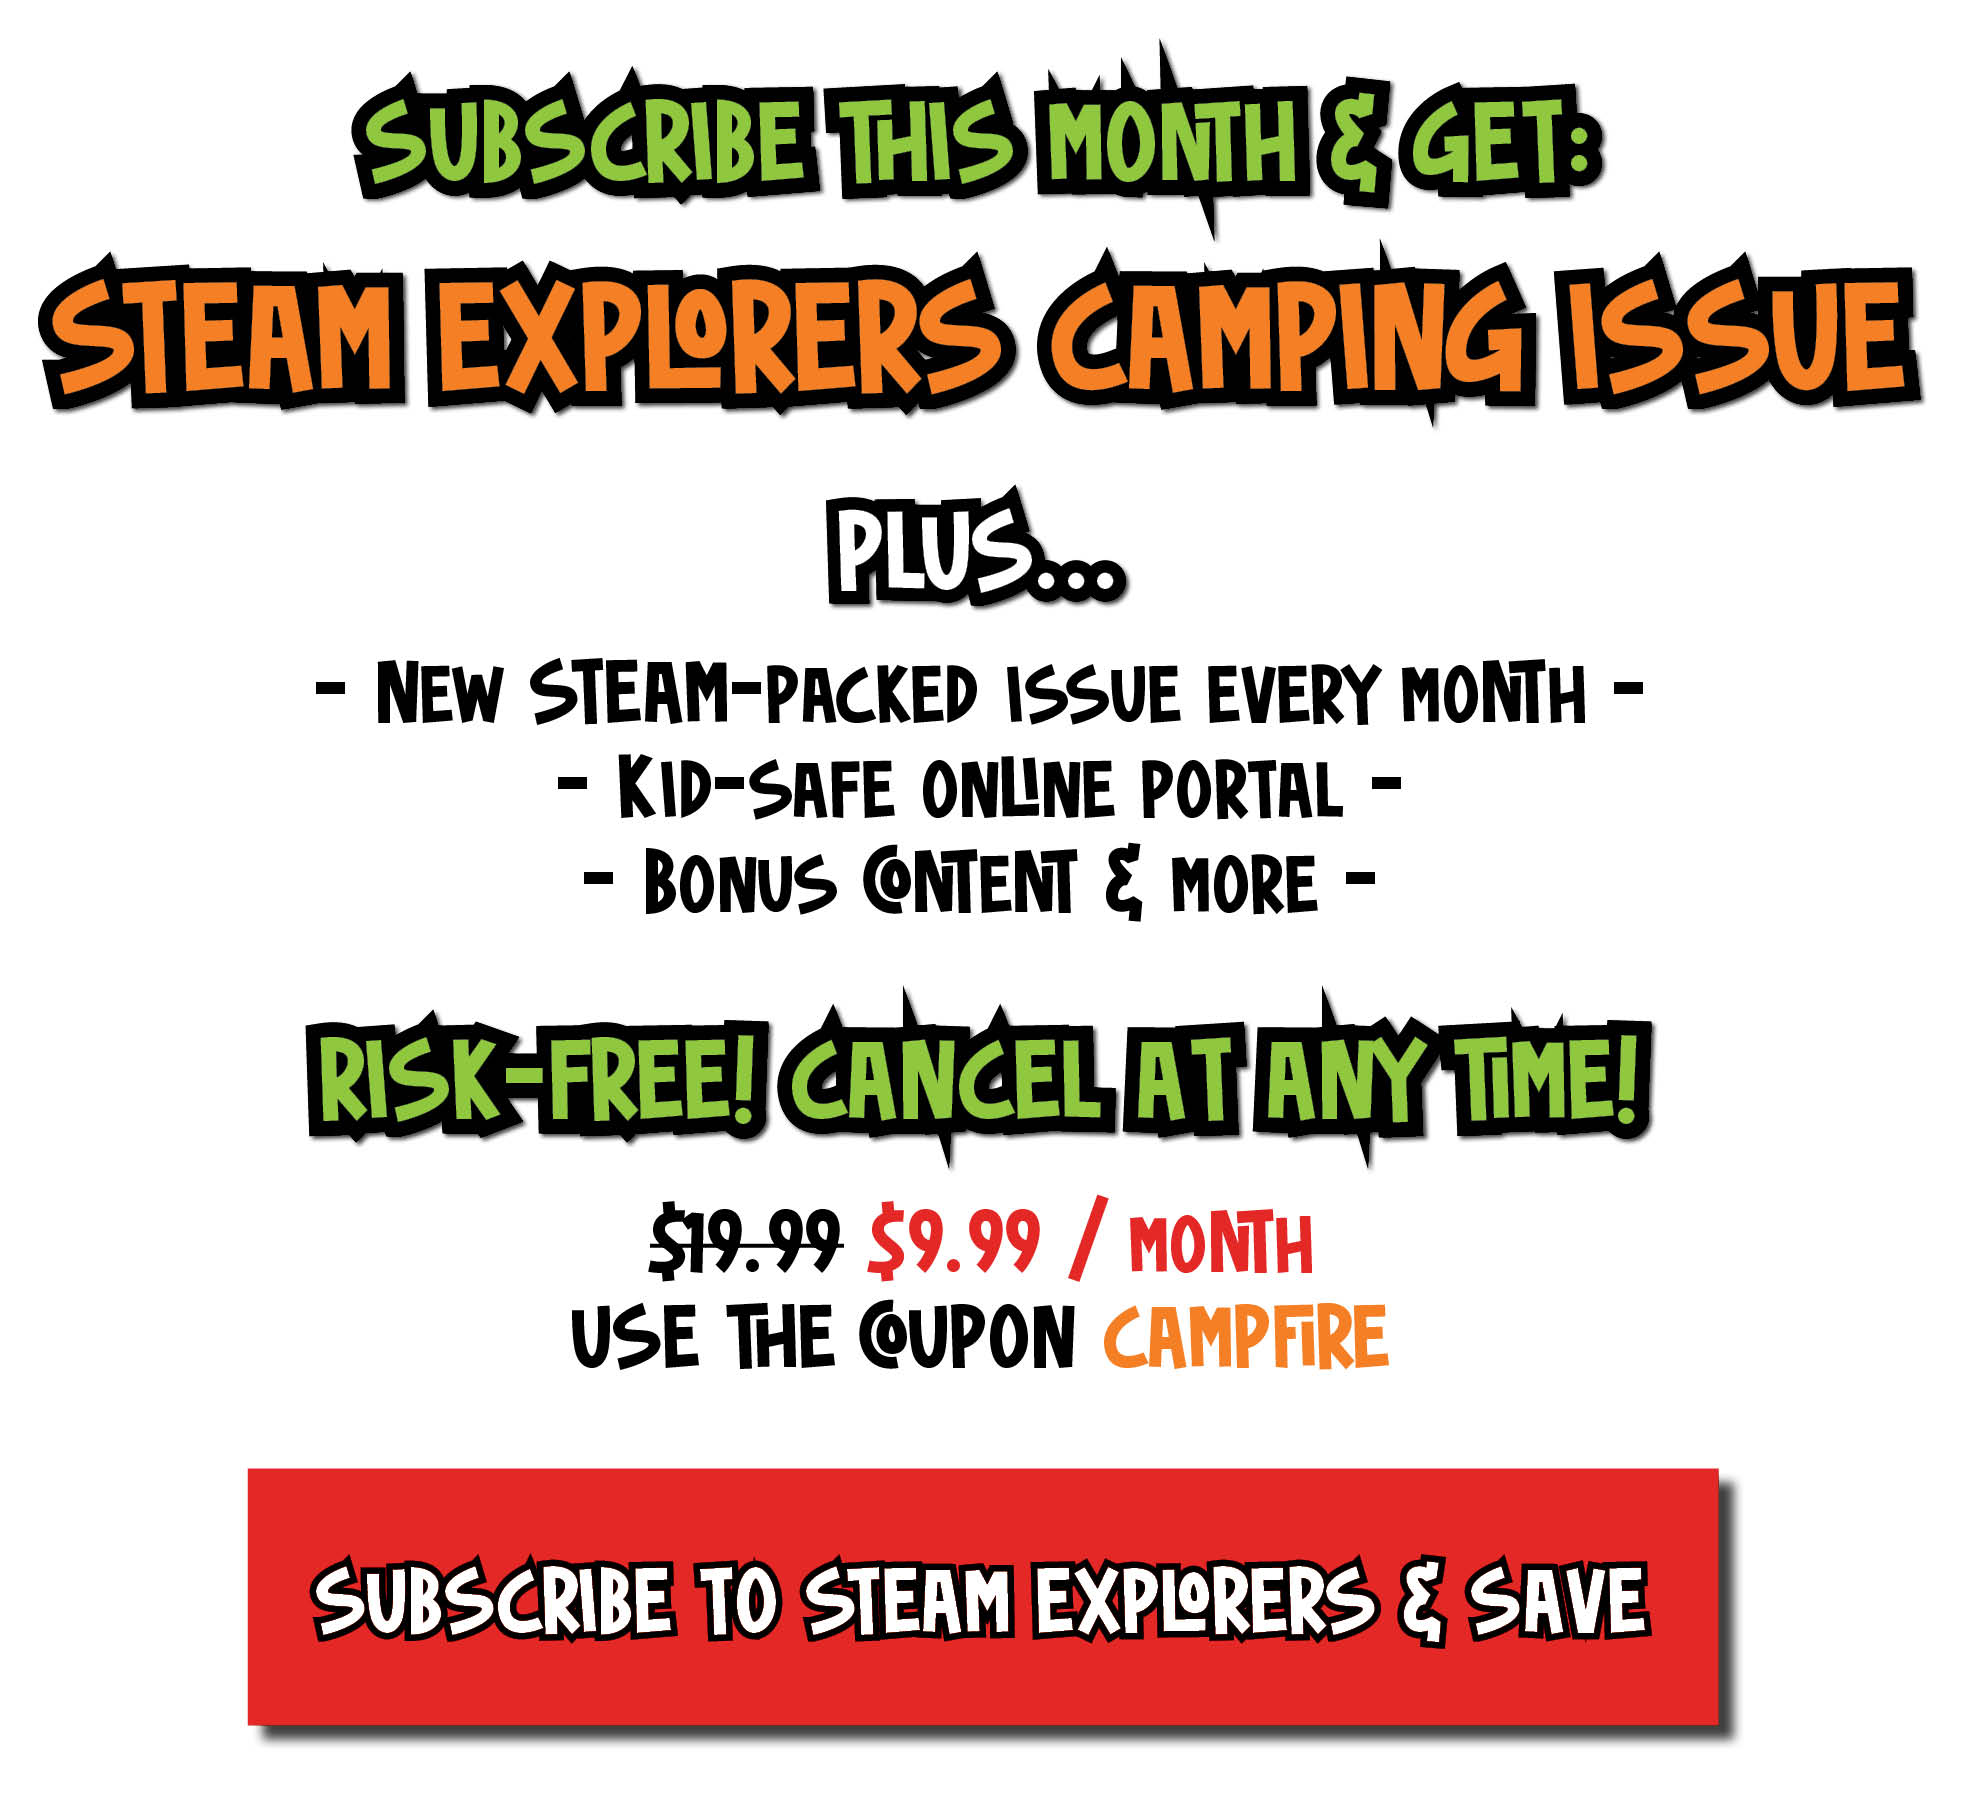 Subscribe to the Camping Issue and Save v4 with 10 coupon